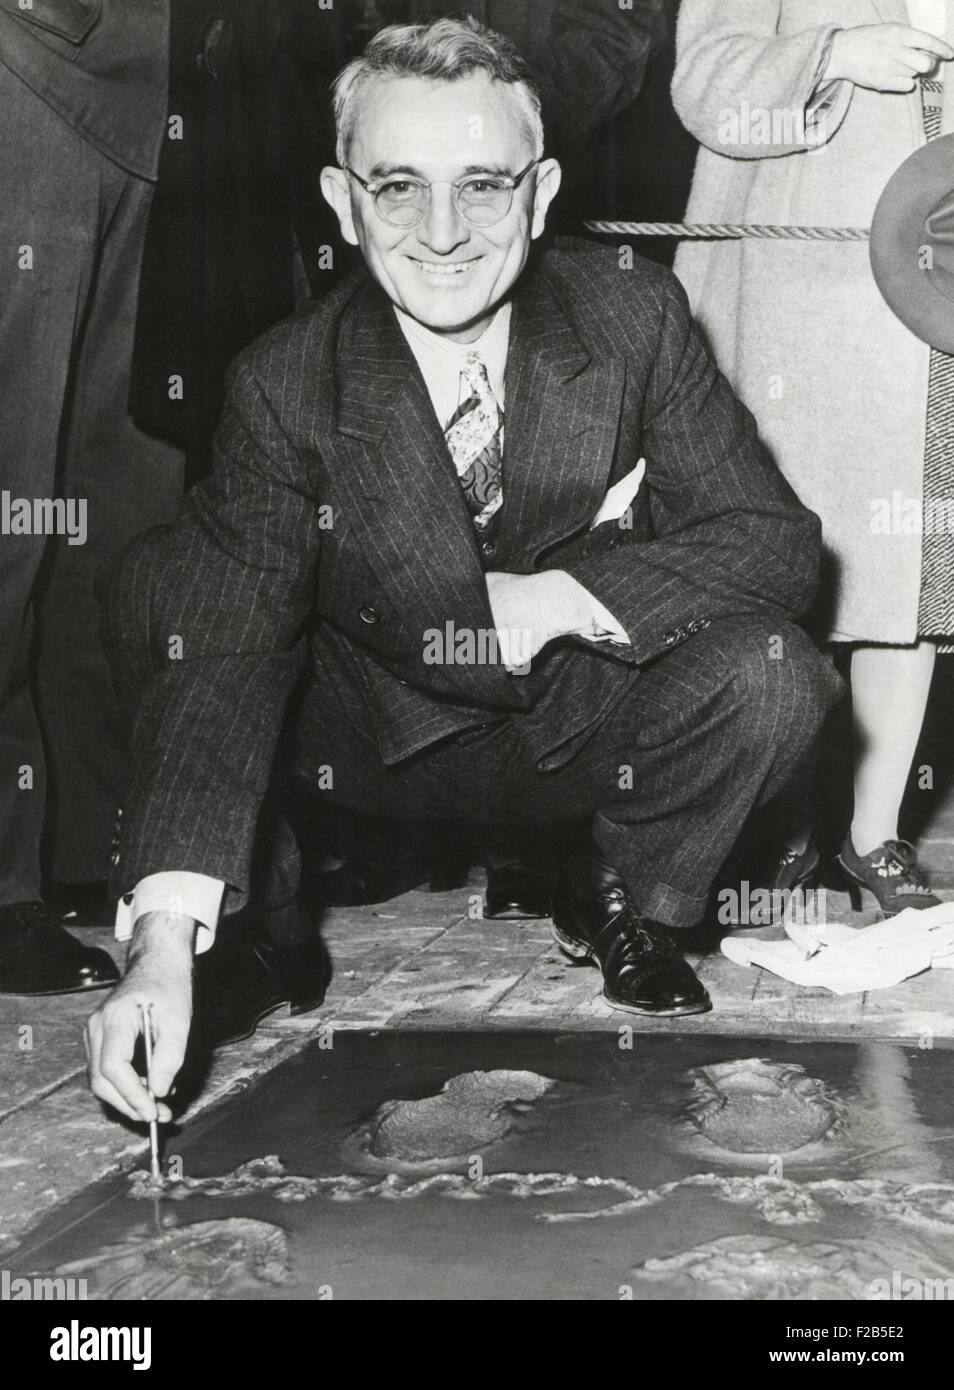 Dale Carnegie, signing his concrete slab at Grauman's Chinese Theatre. His book, 'How To Win Friends and Influence People' of 1931 is a classic and still relevant self-help book. Ca. 1930s. - (BSLOC 2014 17 201) Stock Photo